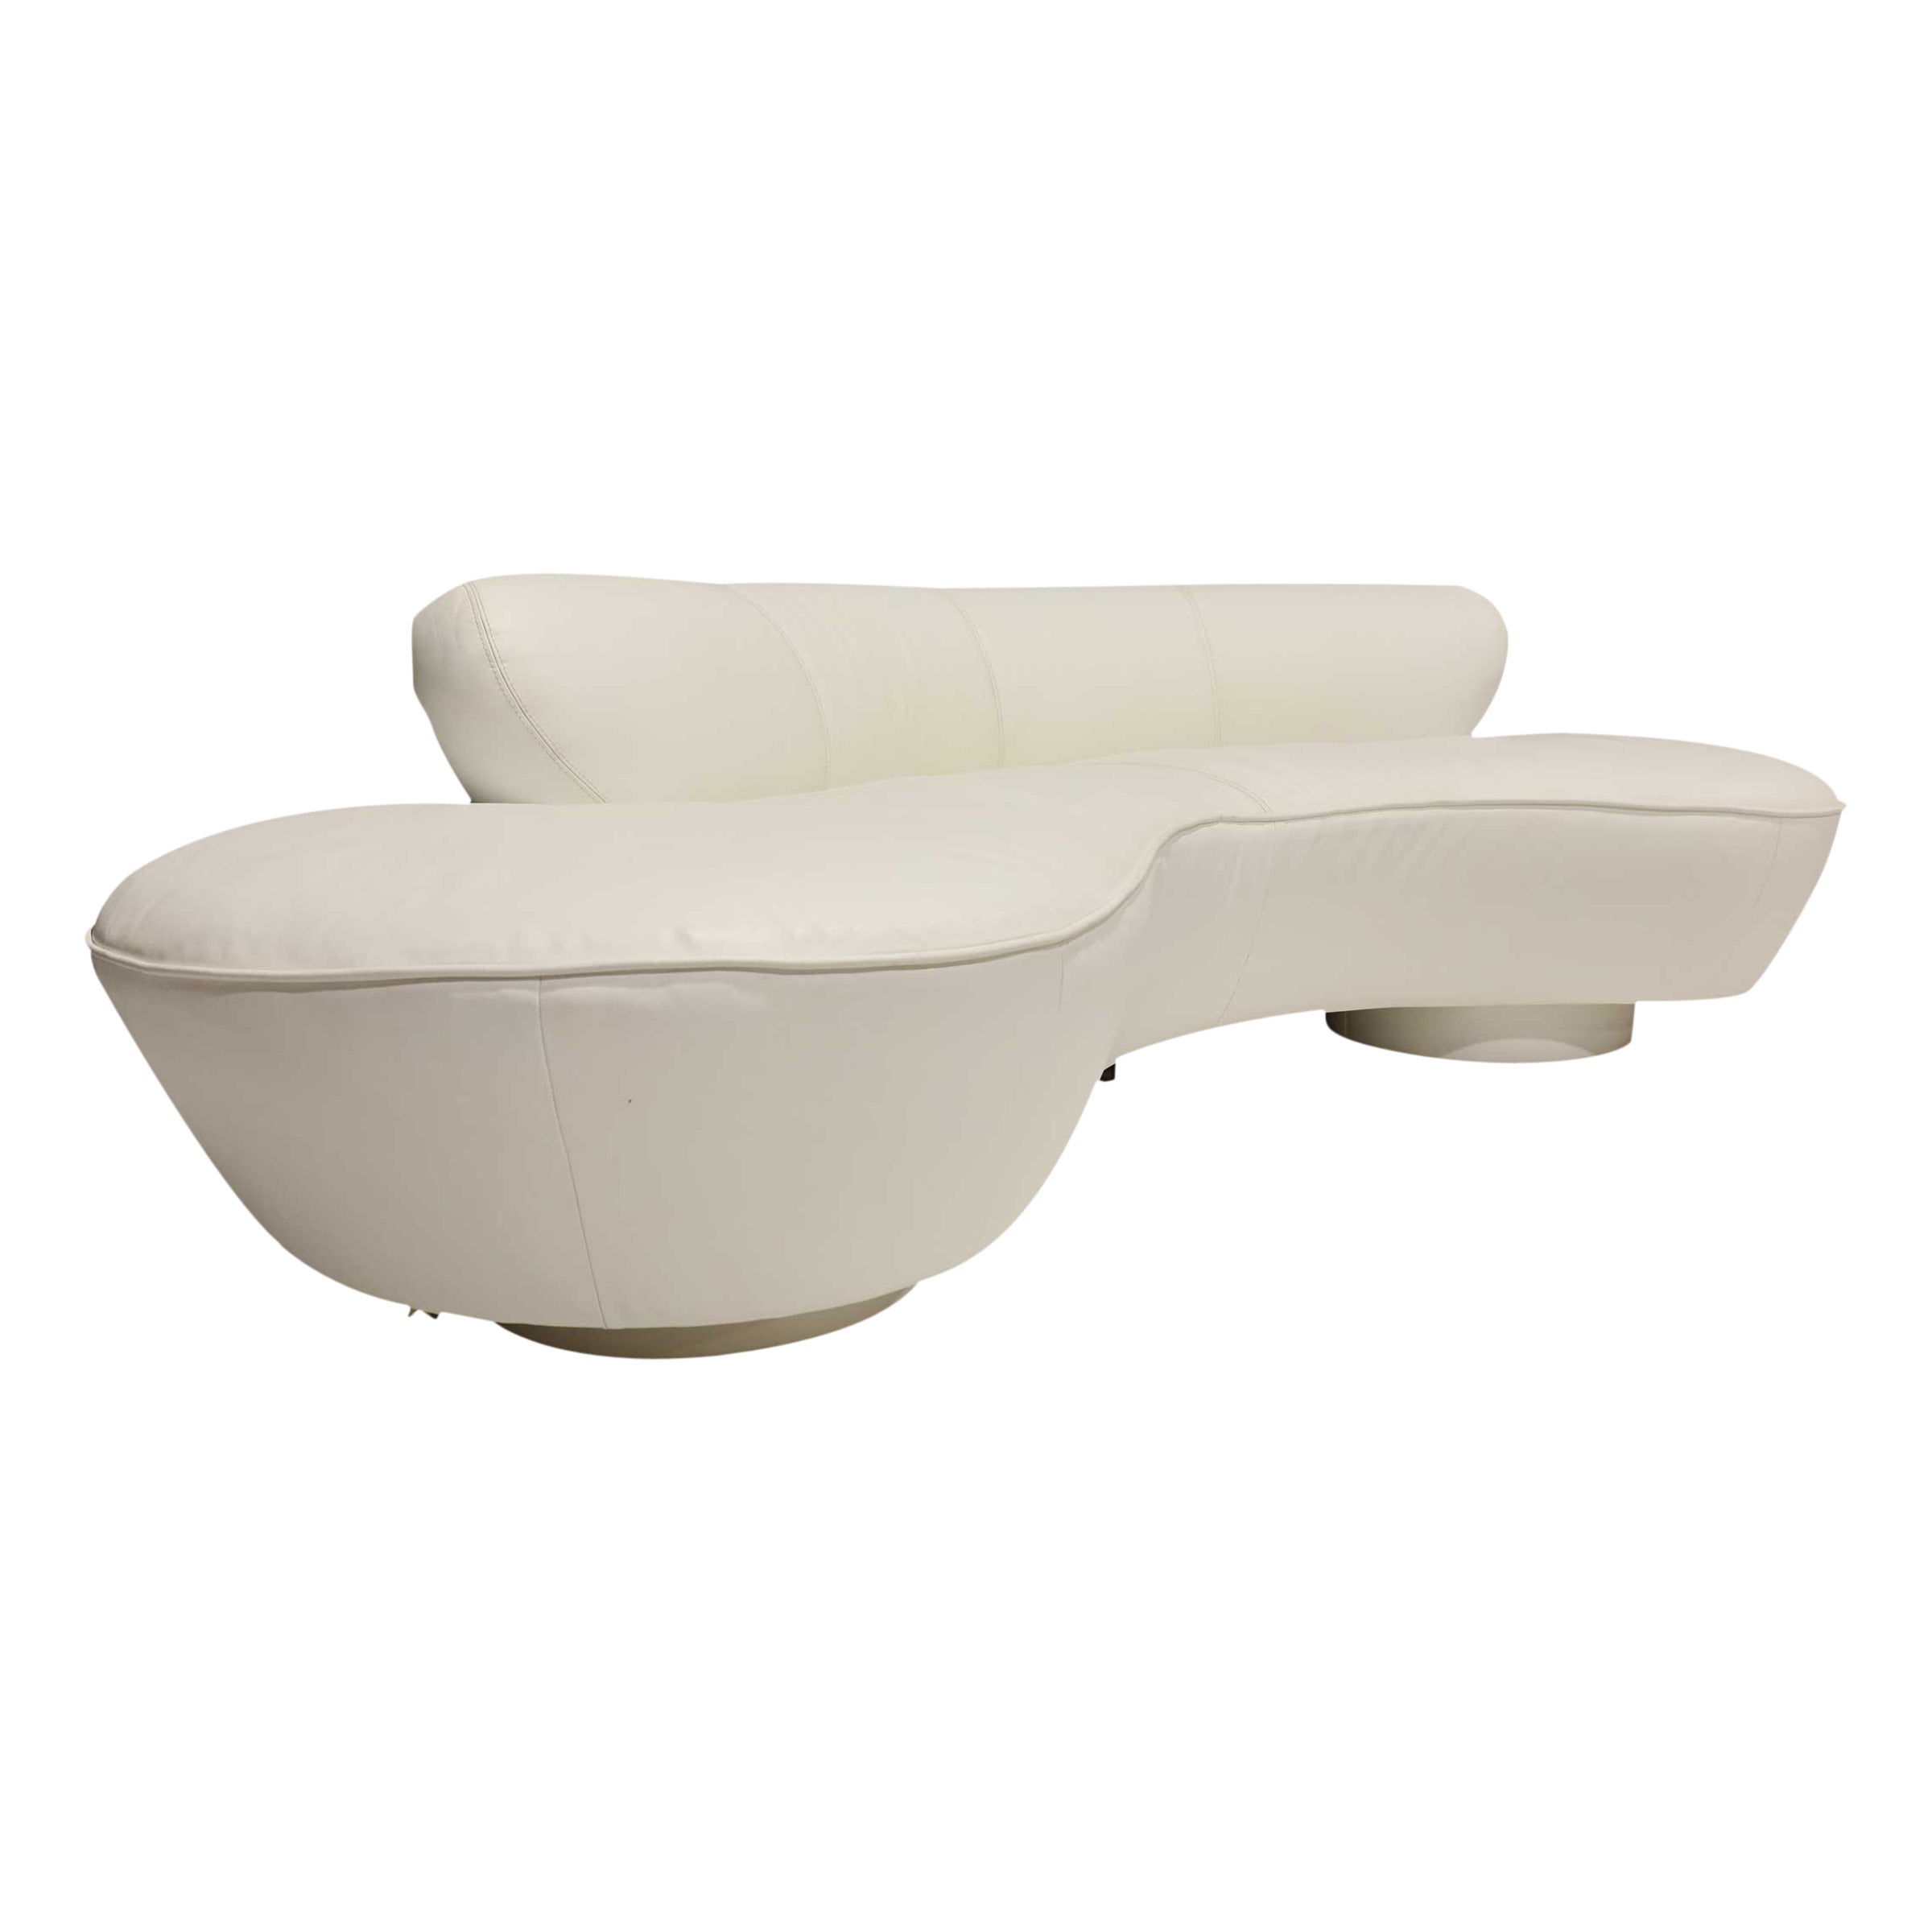 Vladimir Kagan Cloud Serpentine Sofa by Directional in White Leather